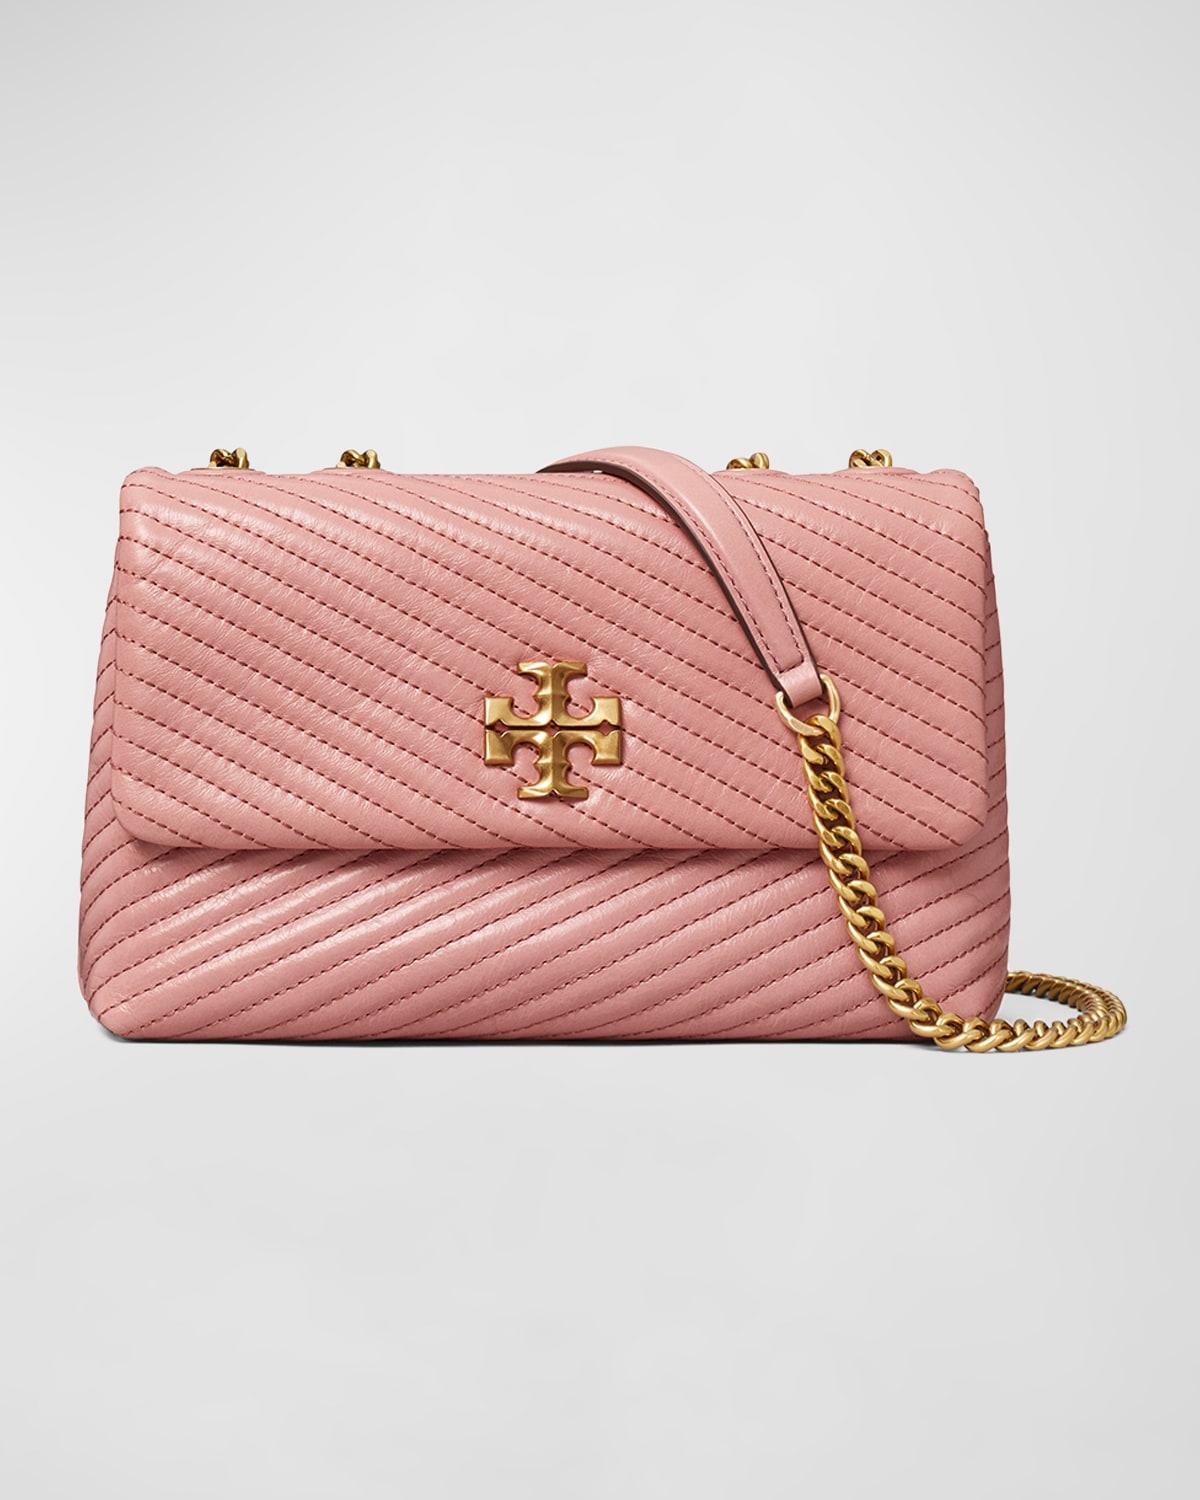 Tory Burch Kira Moto Small Quilted Convertible Shoulder Bag in Pink | Lyst